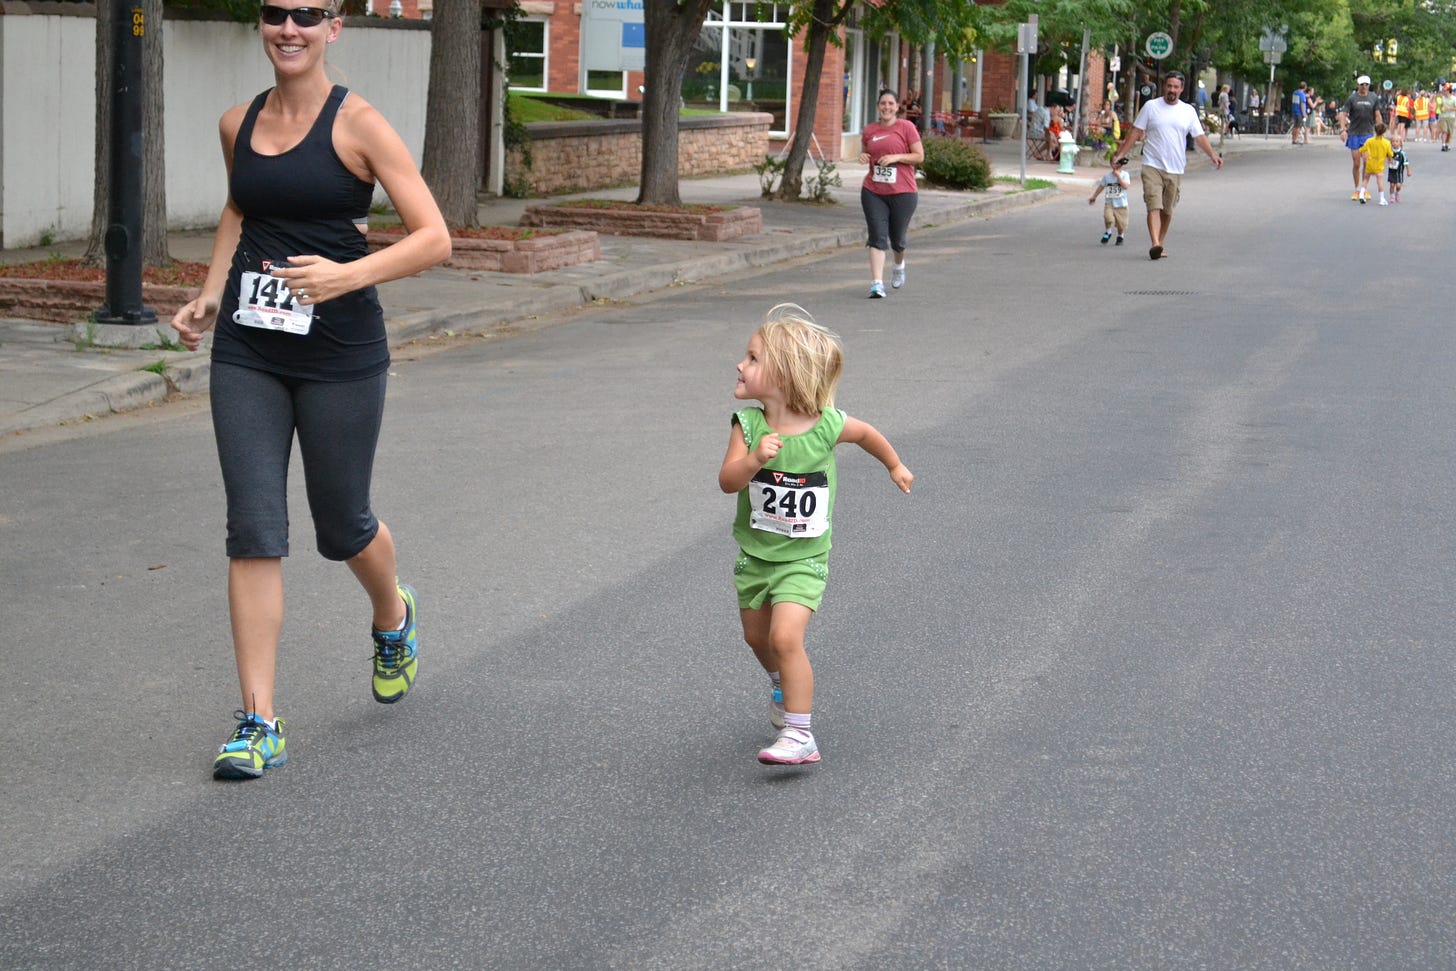 Blakely and daughter running